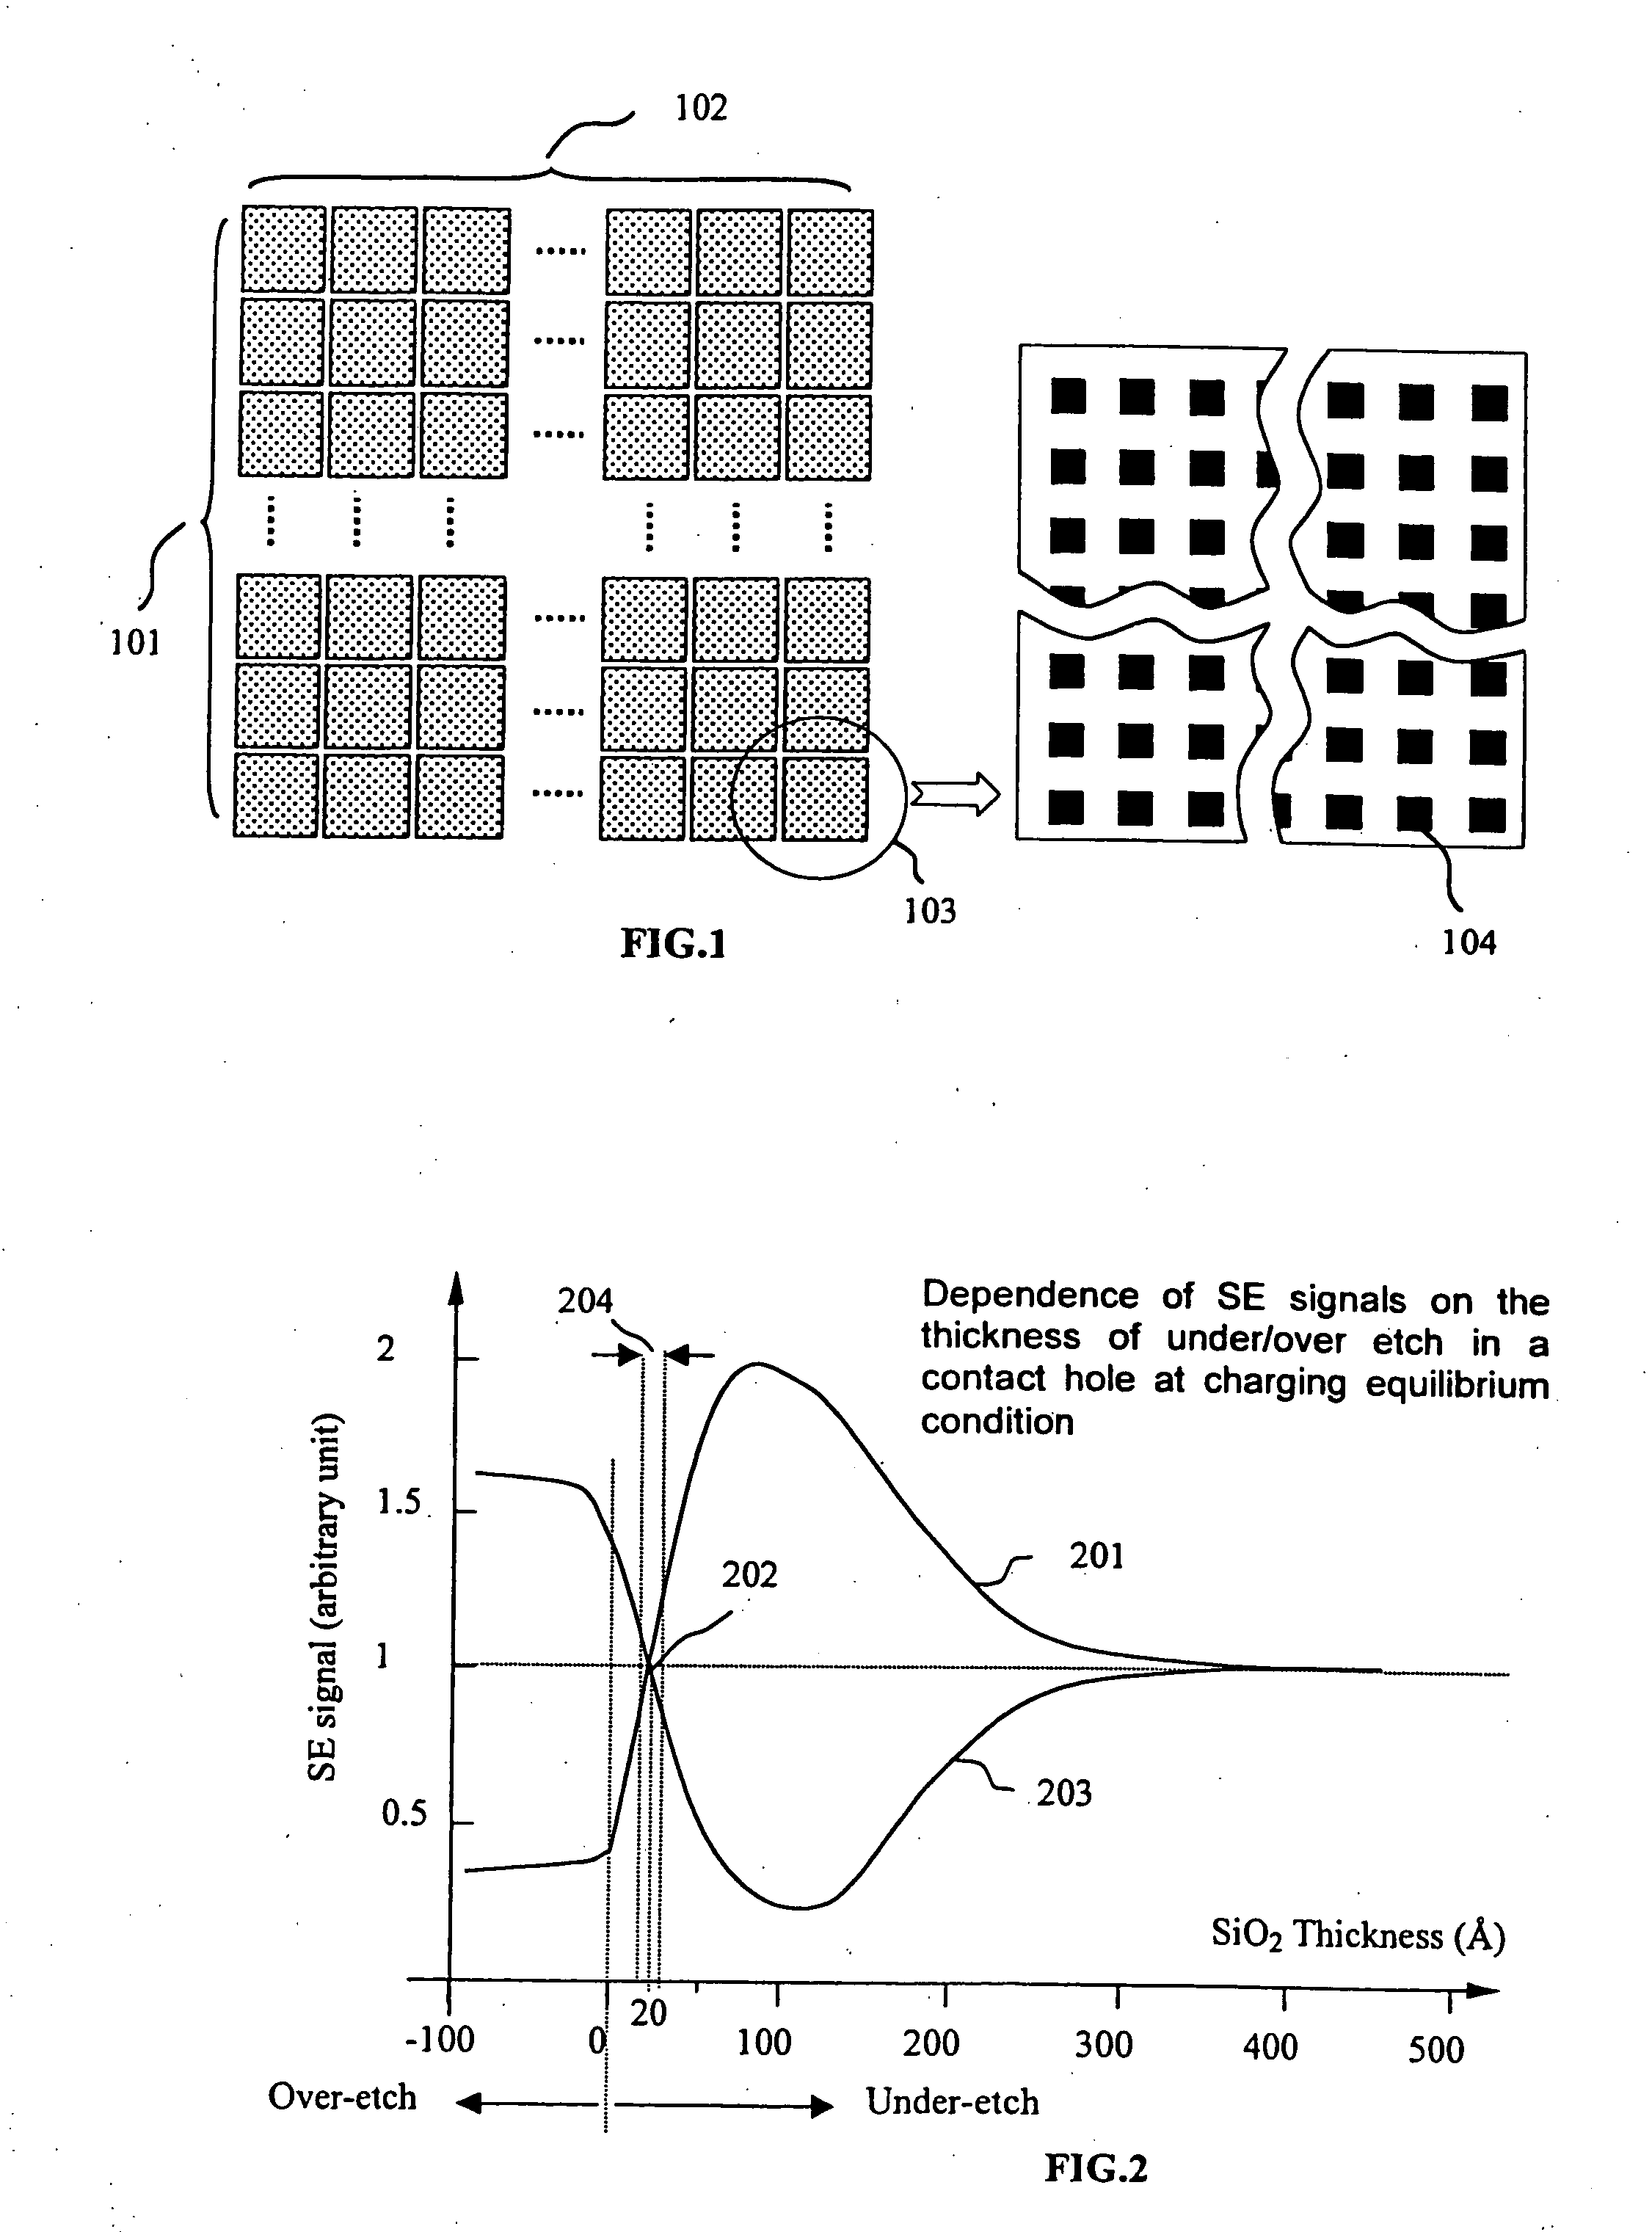 Method for in-line monitoring of via/contact holes etch process based on test structures in semiconductor wafer manufacturing